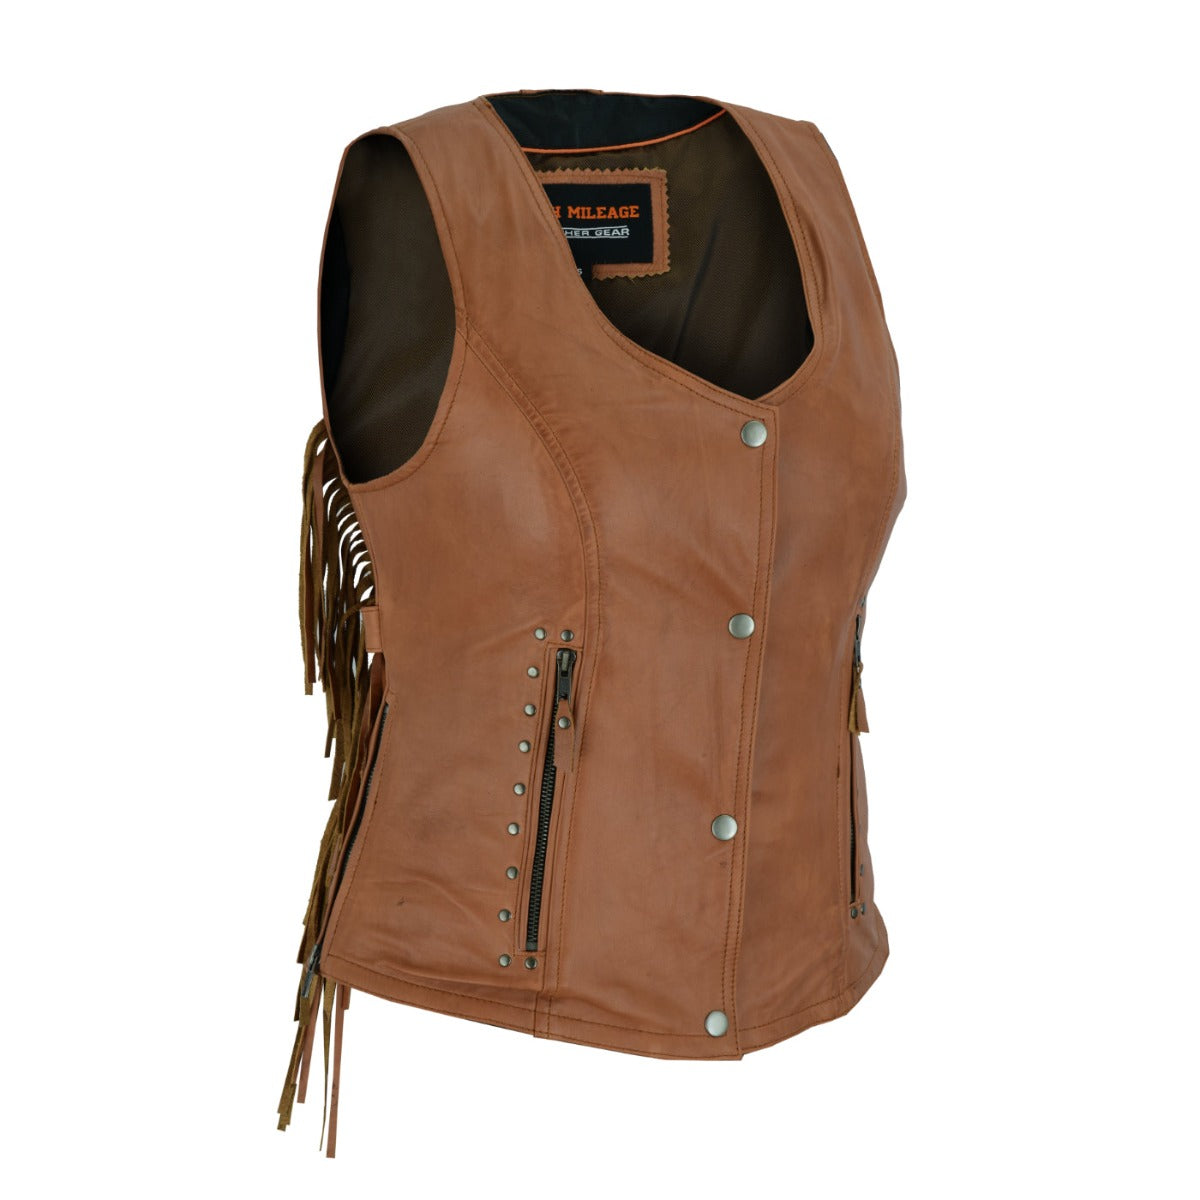 Vance Leather Women's Premium Vest w/Fringes and Rivets, Brown